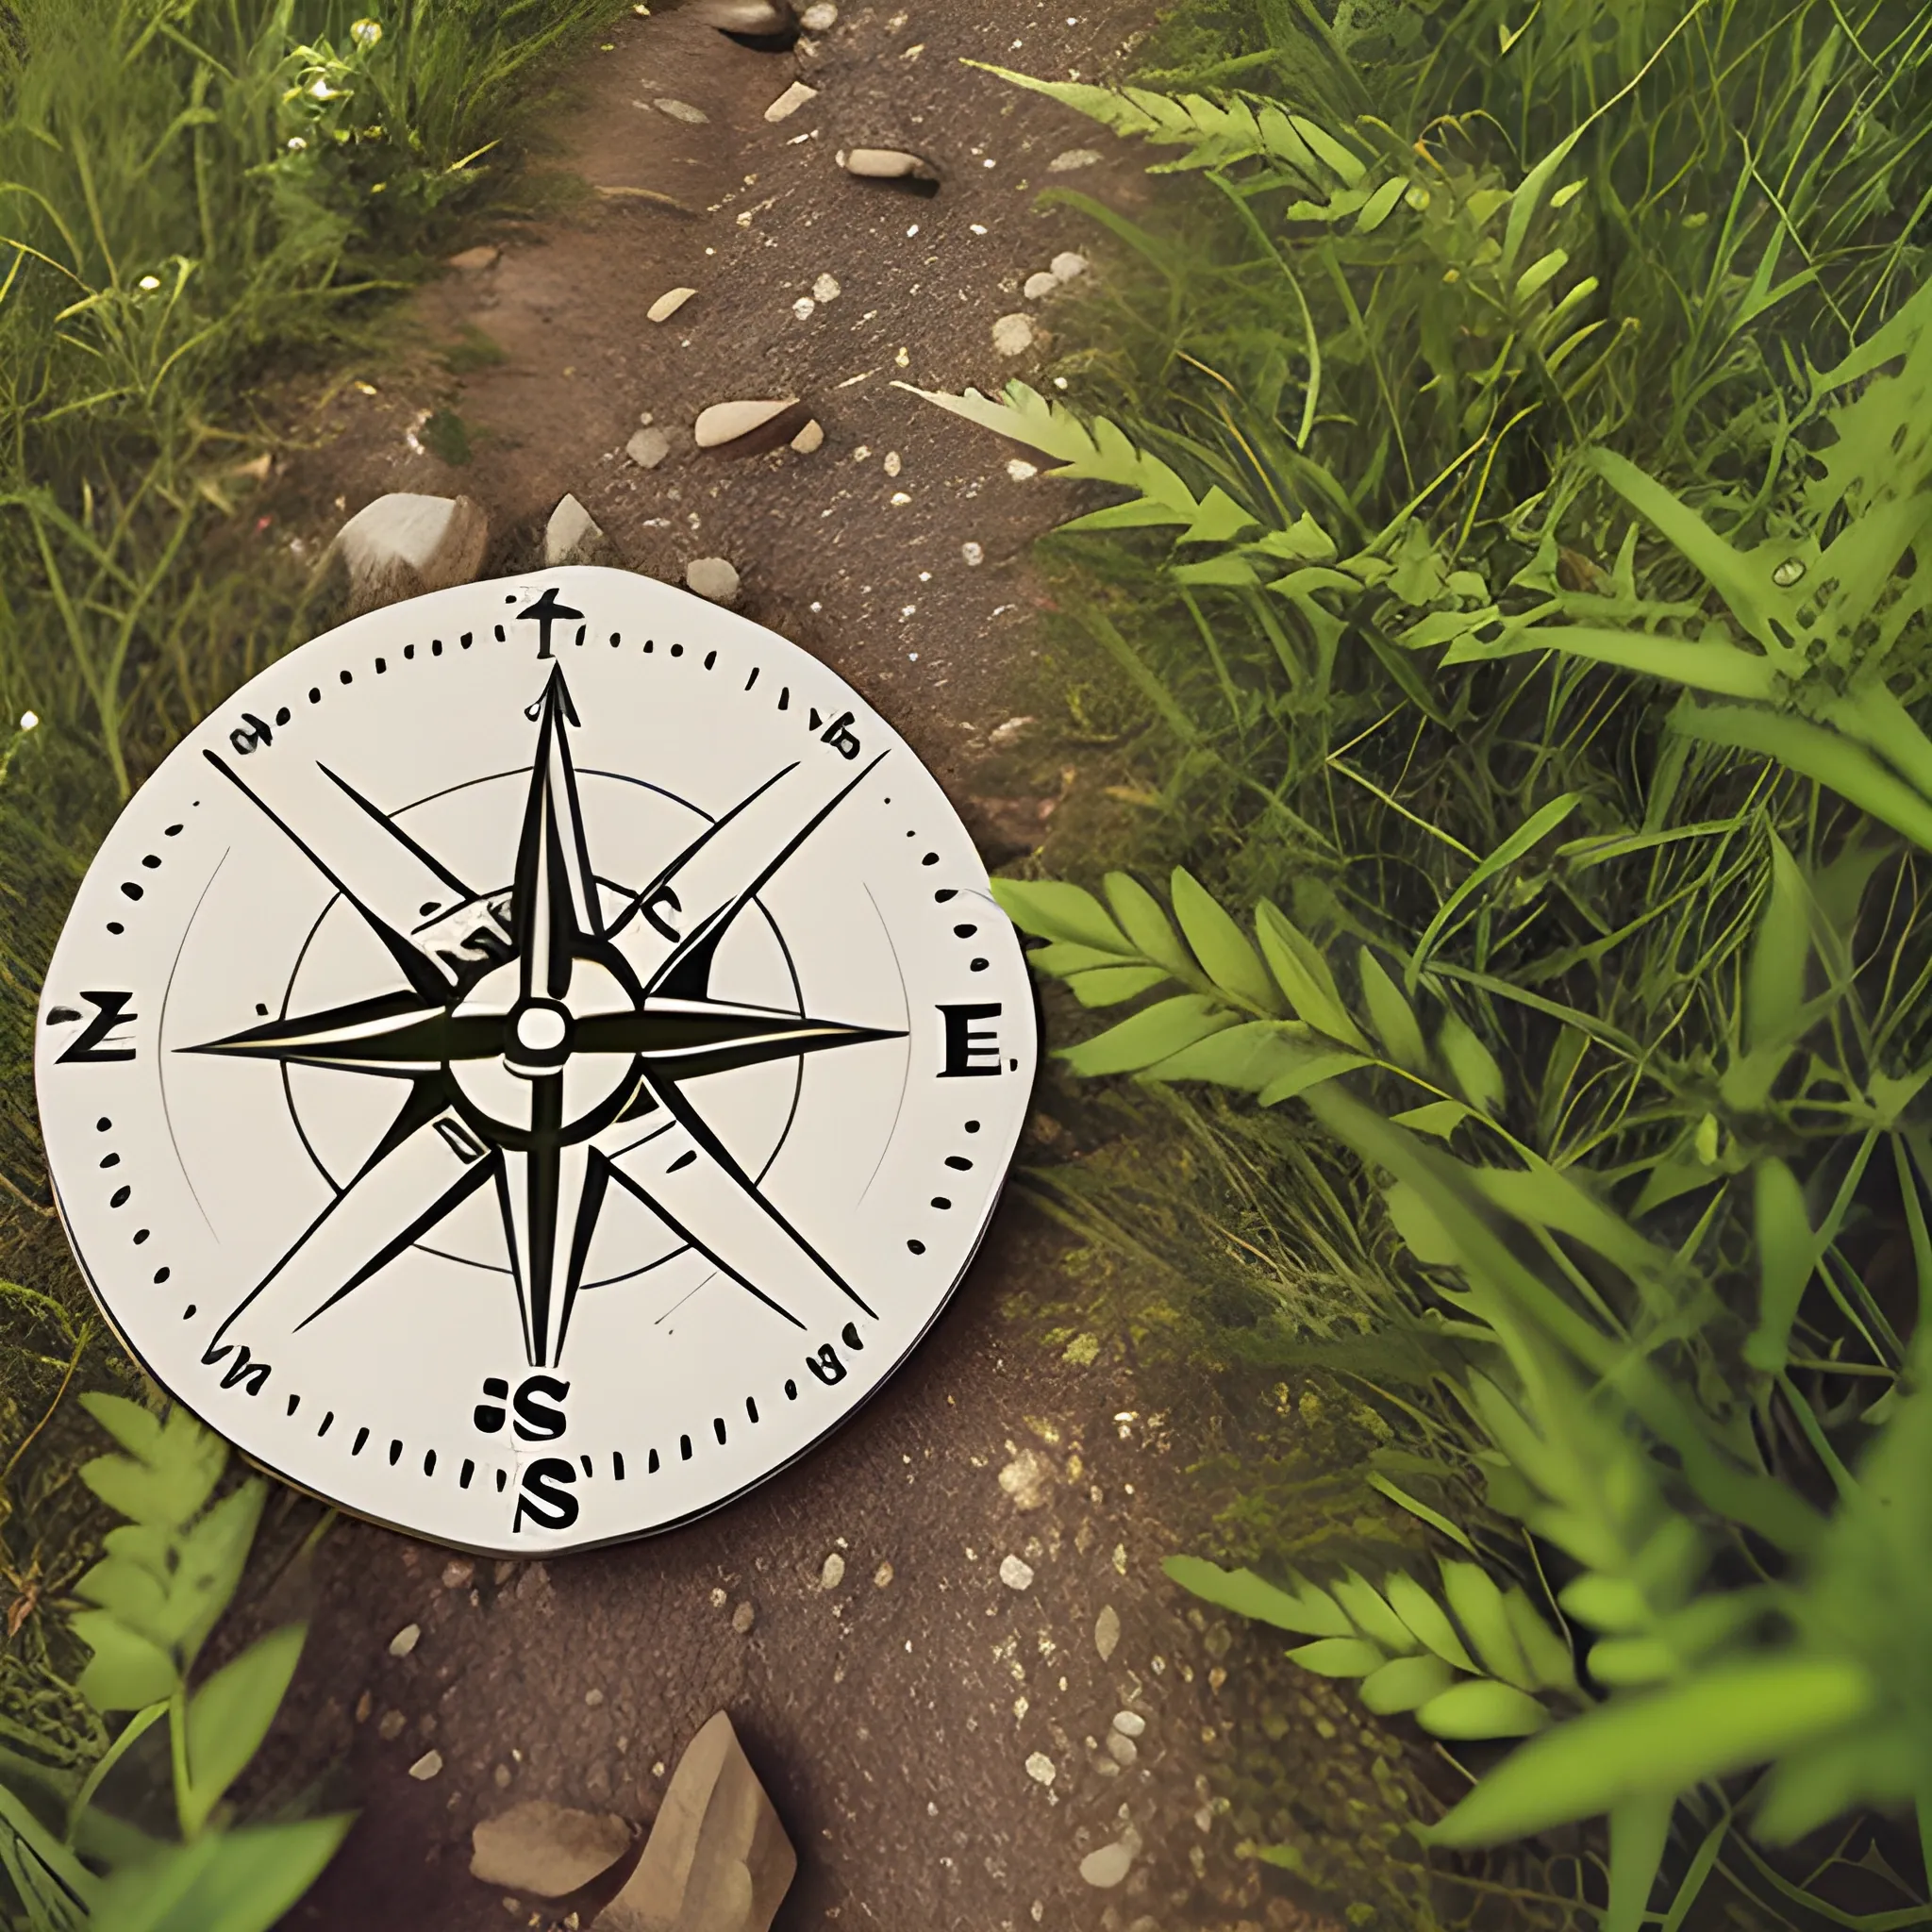 Trail with compass and signs
